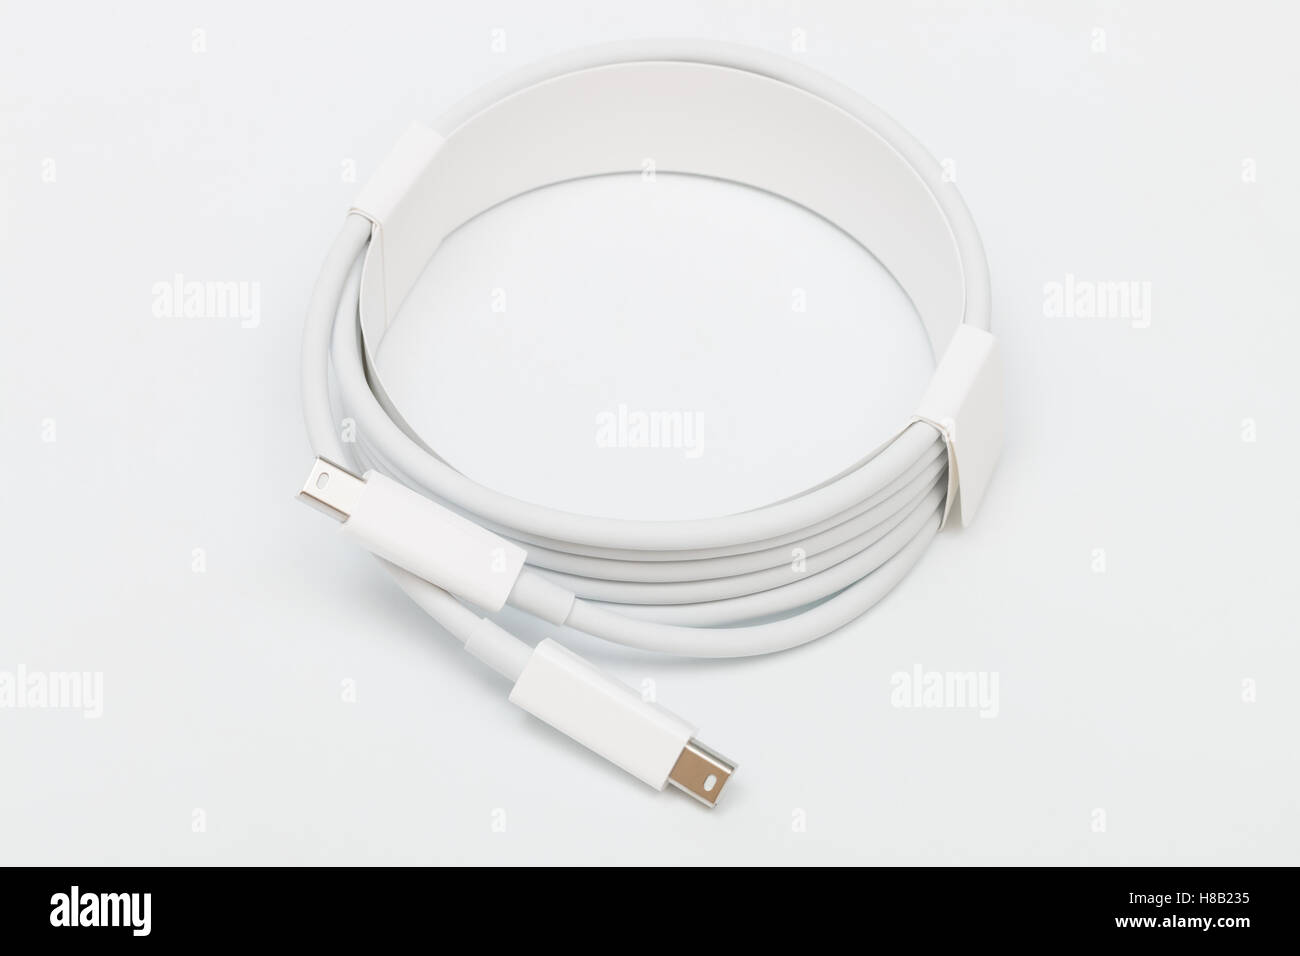 thunderbolt cable on a white background Stock Photo